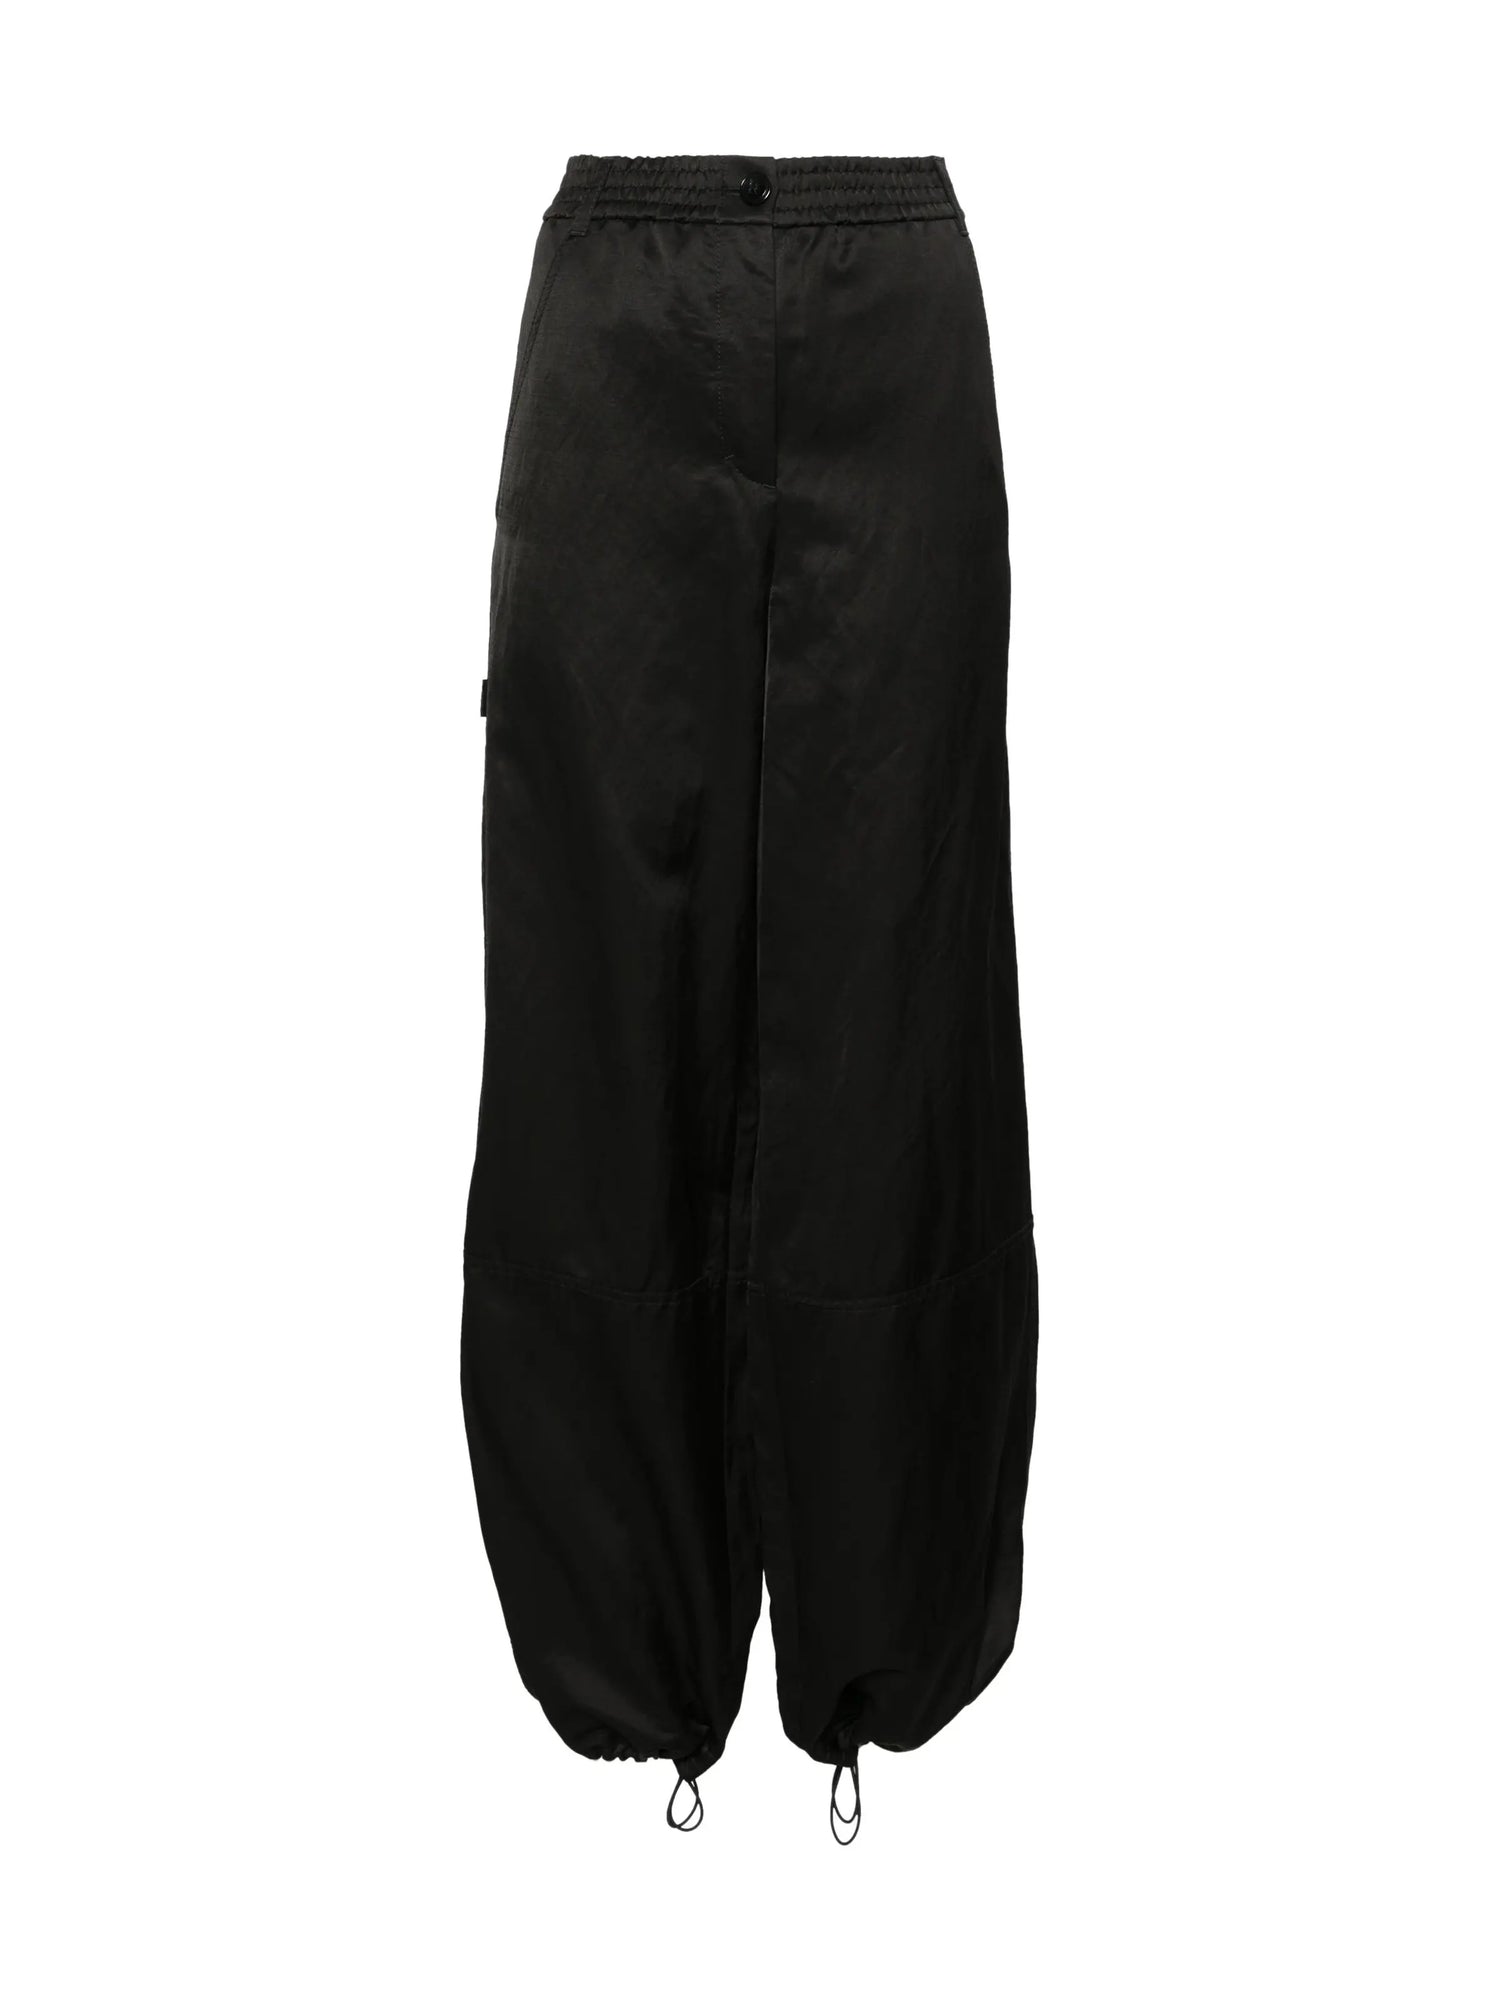 SLOUCHY COOLNESS pants, black